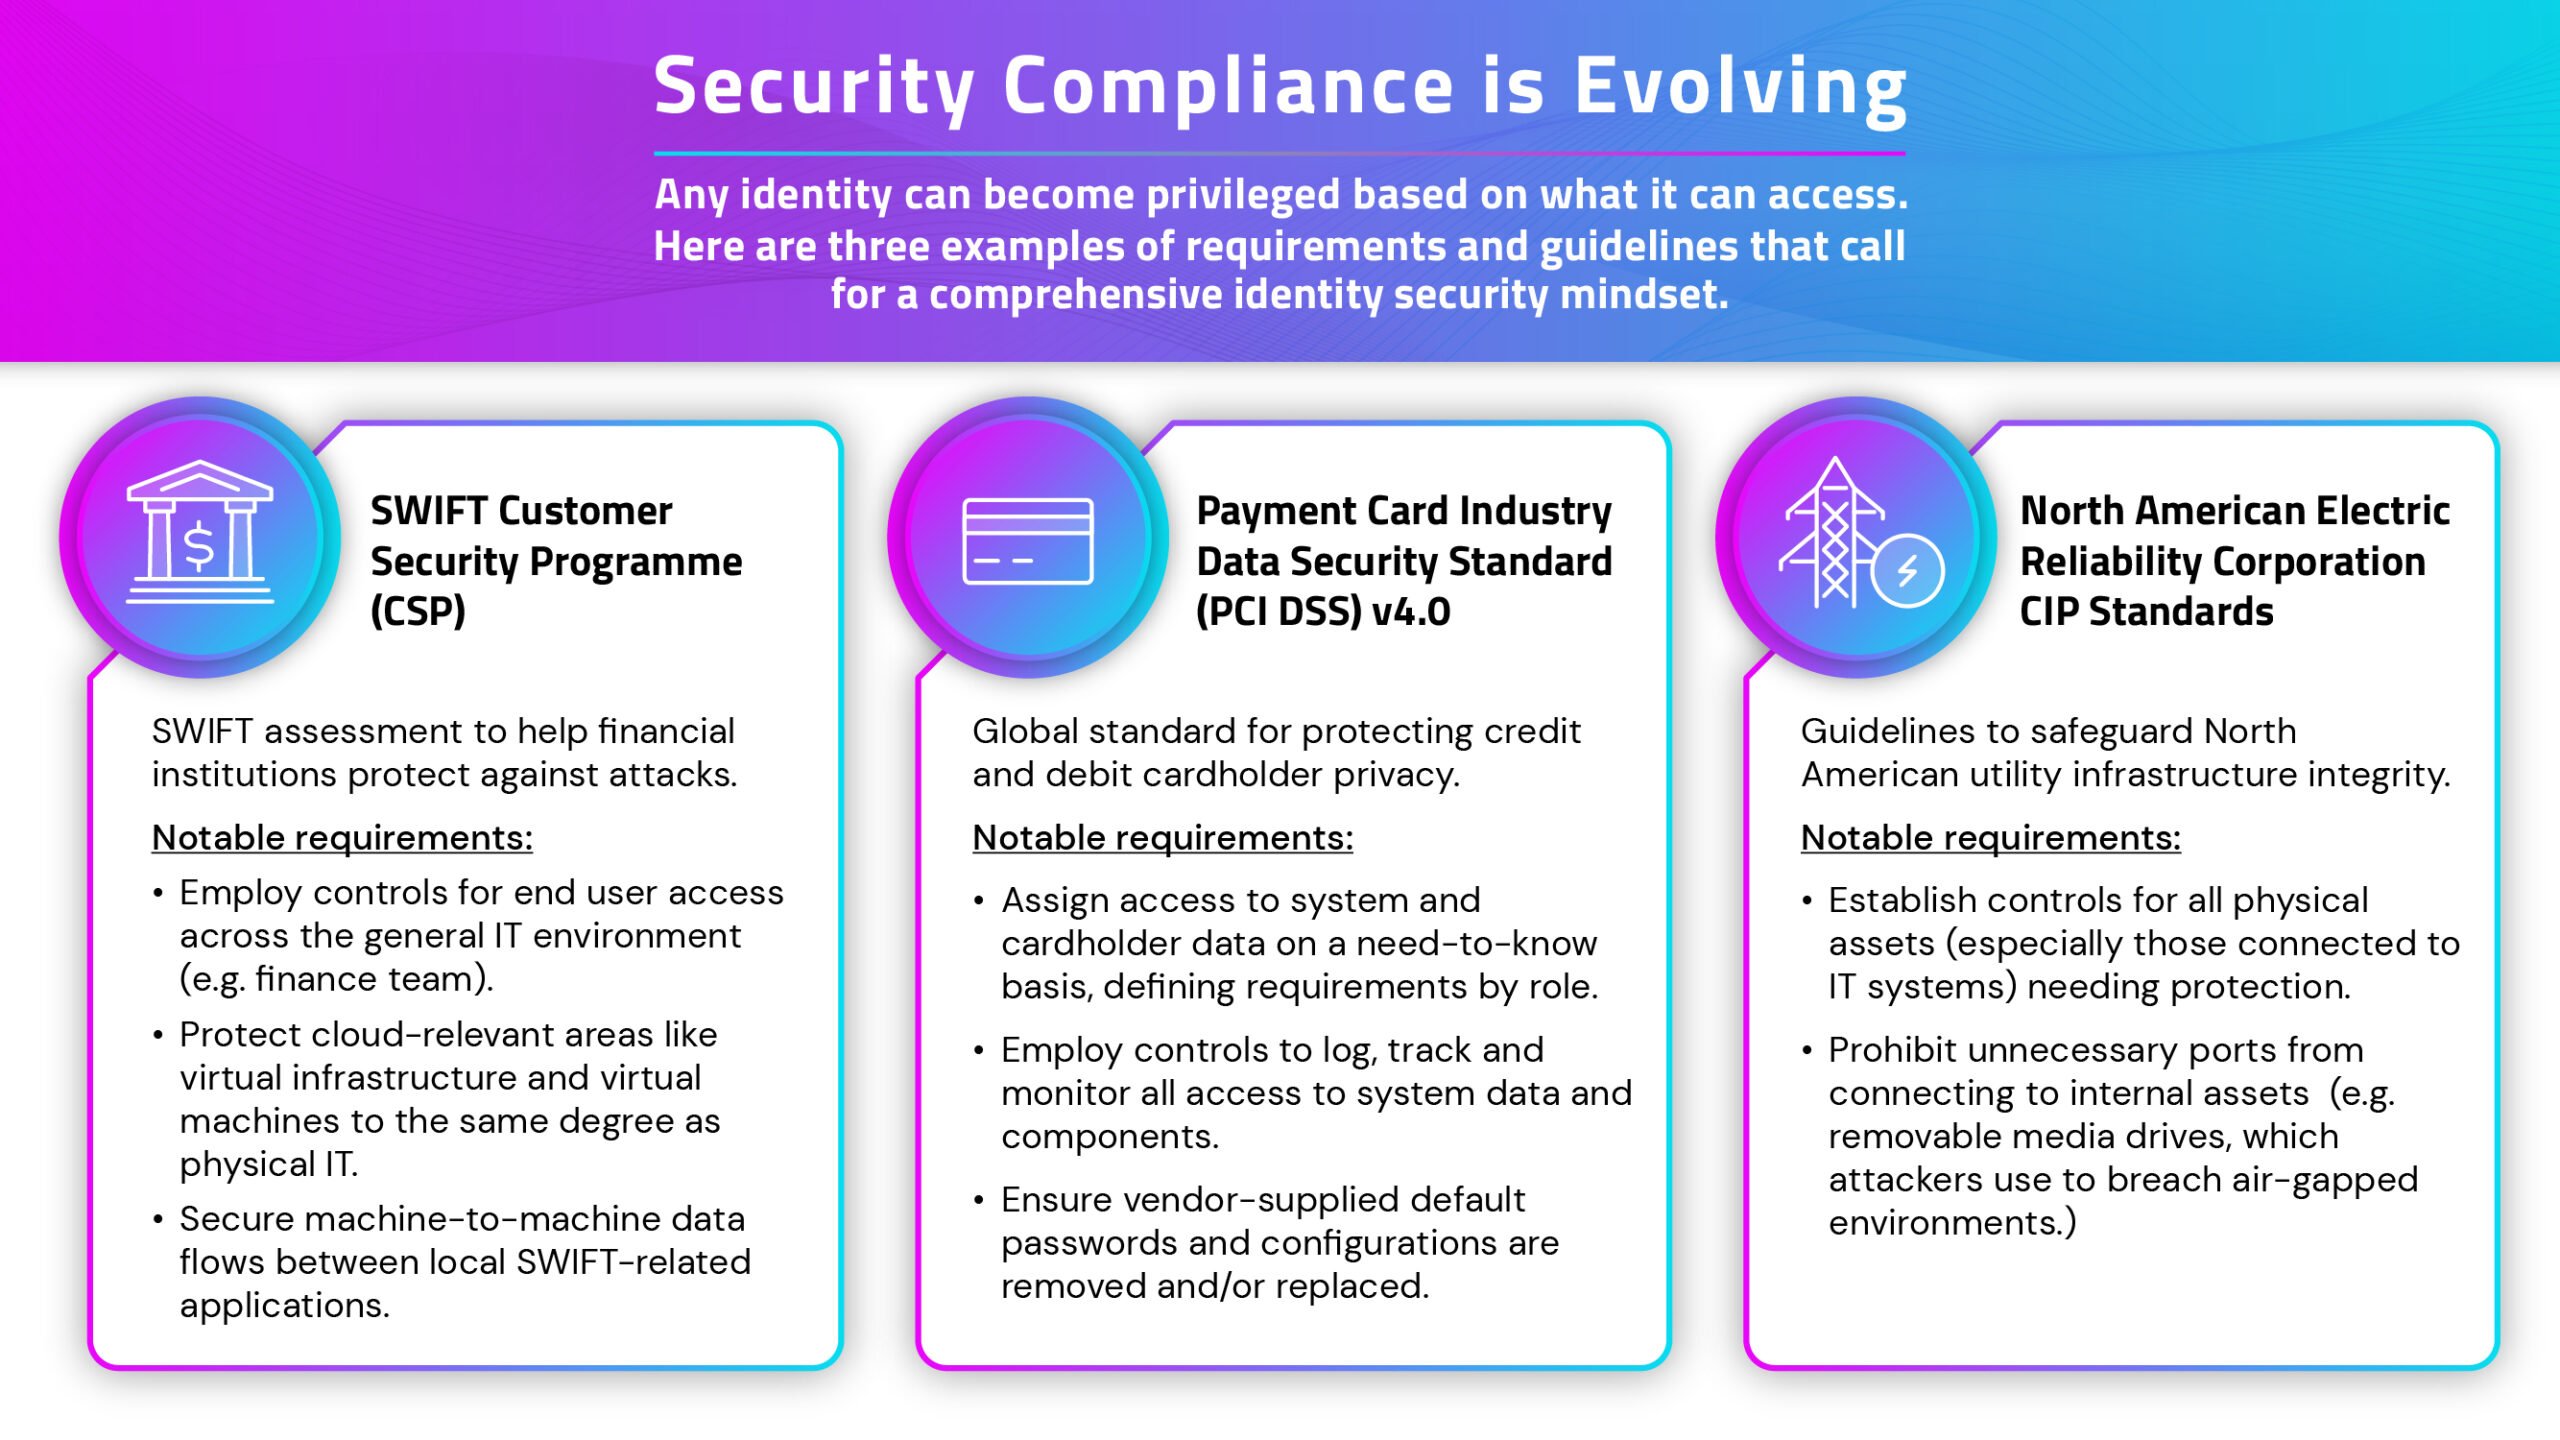 Security compliance is evolving. Any identity can become privileged based on what it can access. This graphic shows three examples of requirements and guidelines that call for a comprehensive identity security mindset. 